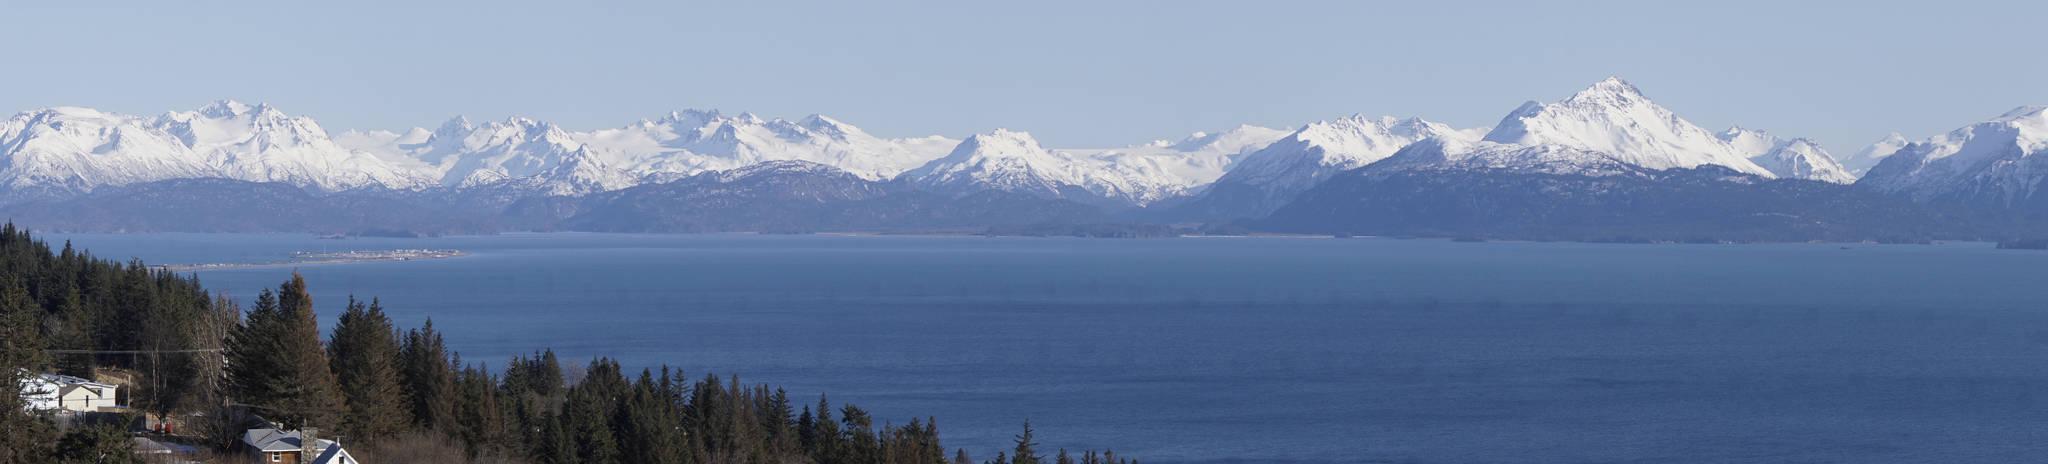 Why we live here, reason number 1 The Homer Spit and the Kenai Mountains glow in the later afternoon sun as seen from the Baycrest Hill turnout on Monday, April 2, 2018, in Homer, Alaska. The spectacular view off the Sterling Highway seen as people round the corner heading south has led to more than a few people settling in Homer. (Photo by Michael Armstrong/Homer News)